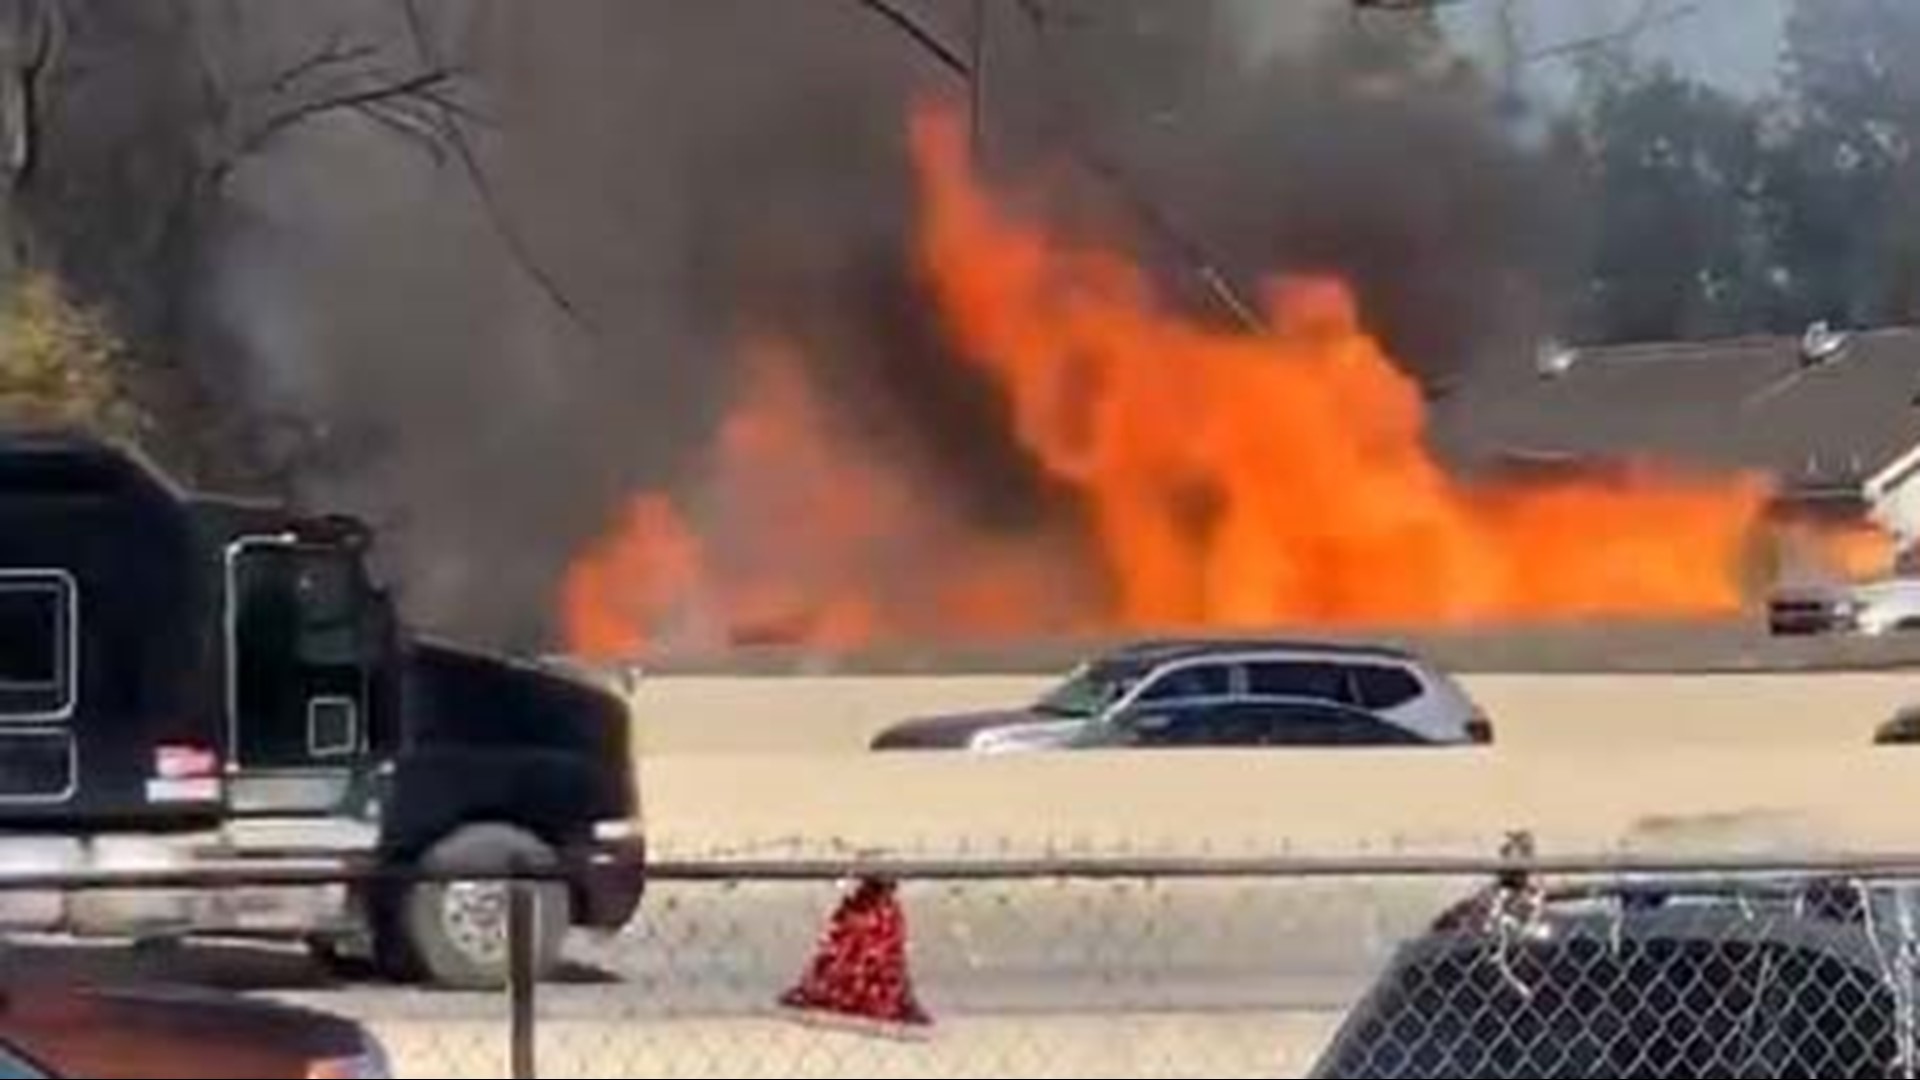 An 18-wheeler burst into flames on the North Loop East feeder road near the Hardy Toll Road. One person was killed and the fire spread to a nearby house.